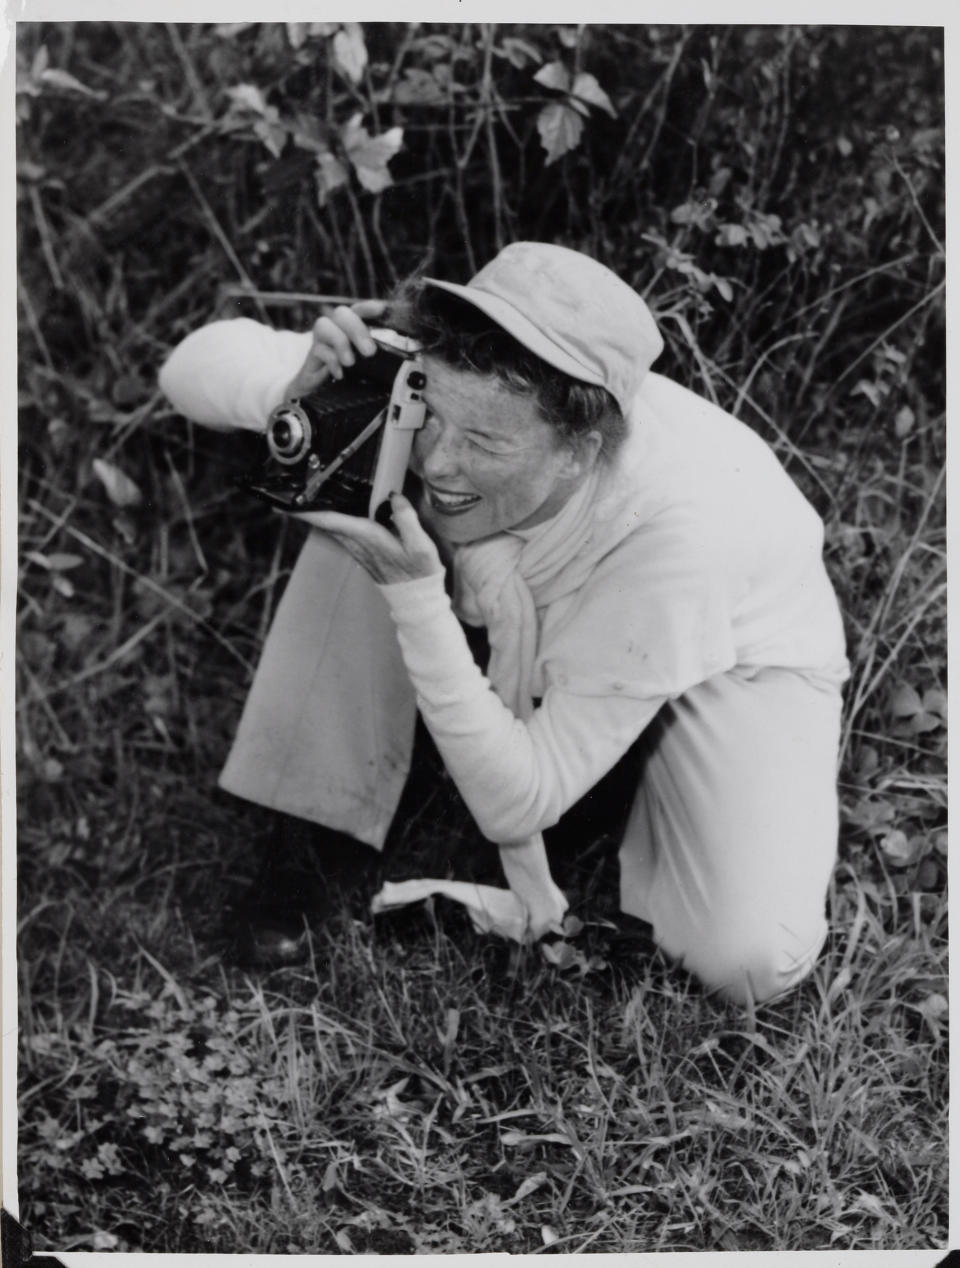 FILE - This picture provided by The New York Public Library shows Katherine Hepburn taking a picture in a photo from her scrapbook of her 1955 Old Vic Australian tour. "The fact that she wore slacks and wanted to be comfortable influenced women's ready-to-wear in the United States," said Jean Druesedow, director of the Kent State University Museum, which was given 700 items from Hepburn’s estate. (AP Photo/The New York Public Library)